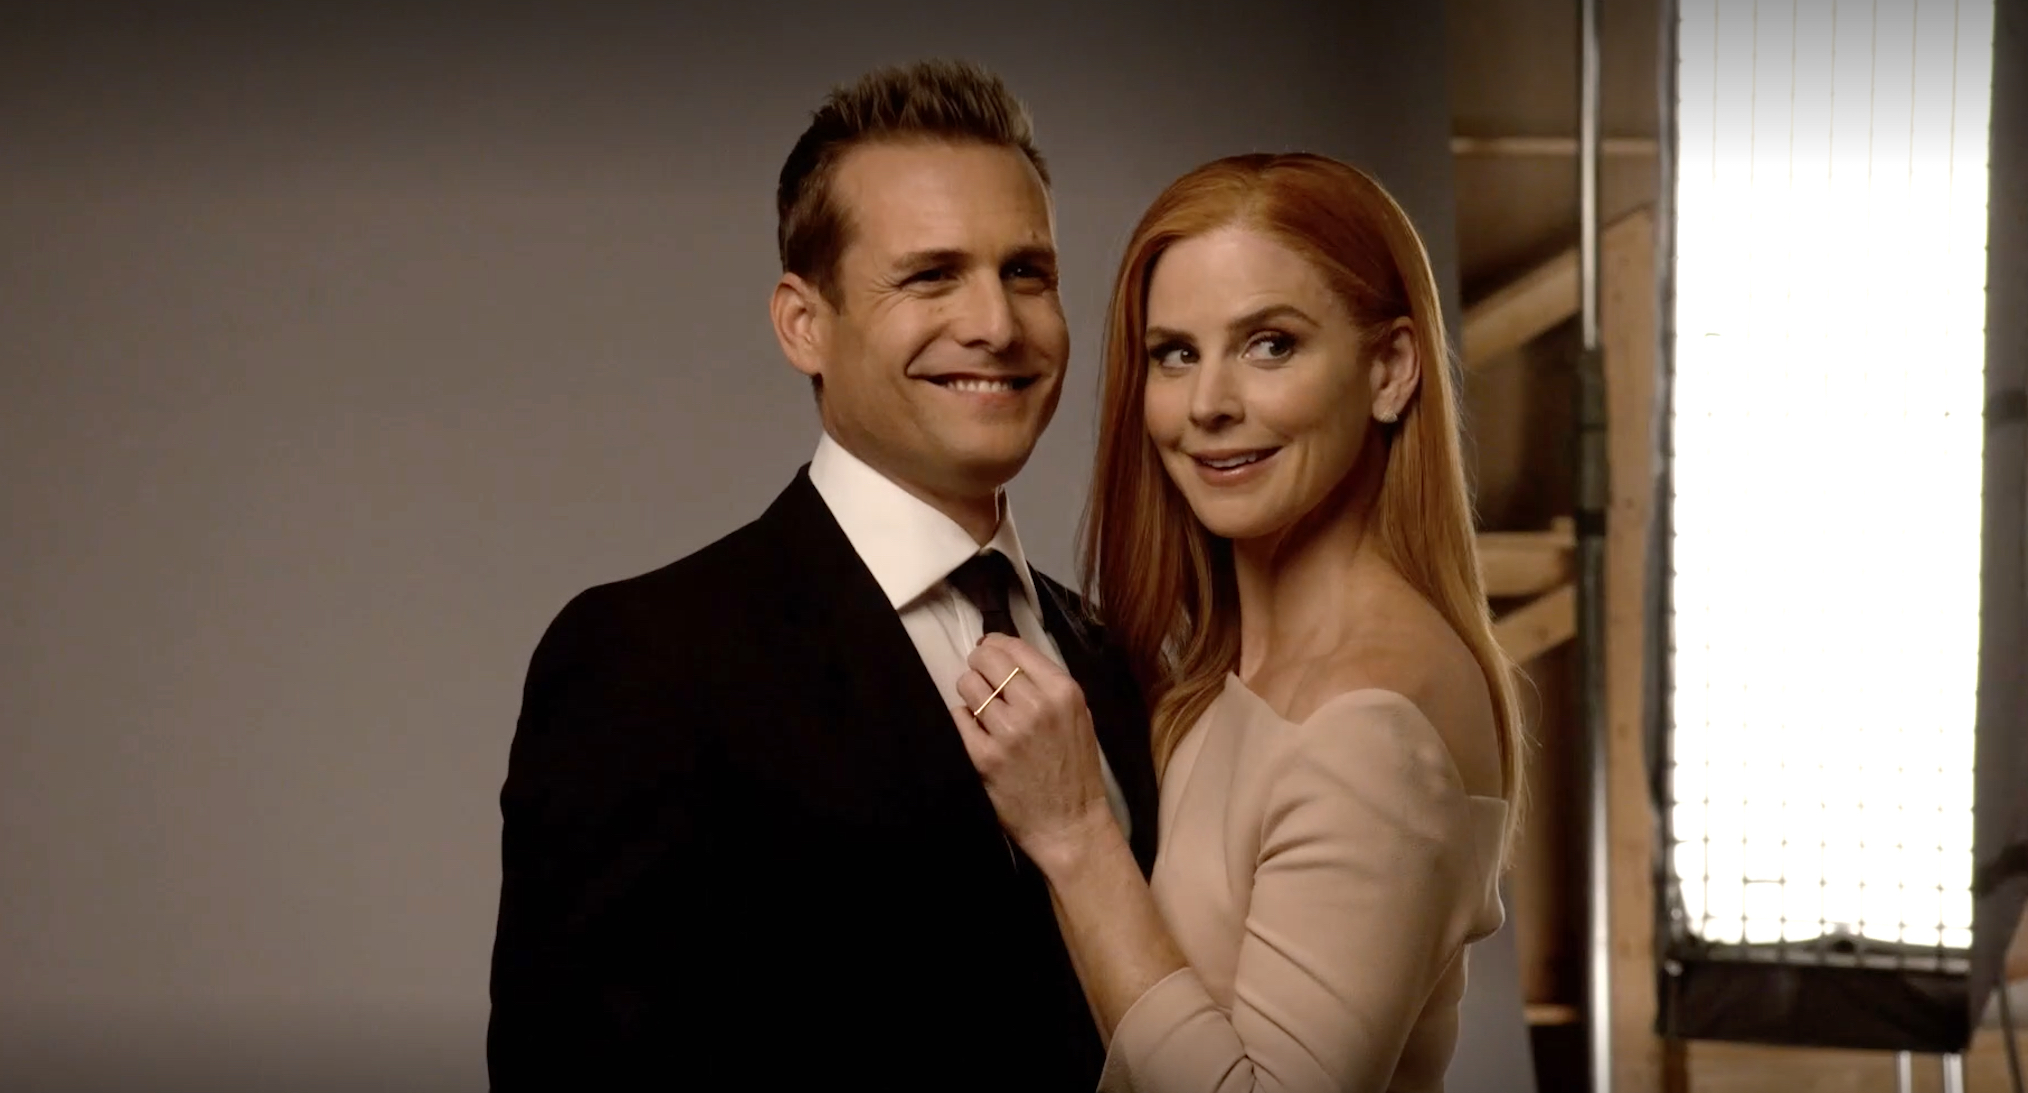 Behind The Scenes Of The Suits Cover Shoot With Sarah Rafferty Gabriel Macht Video